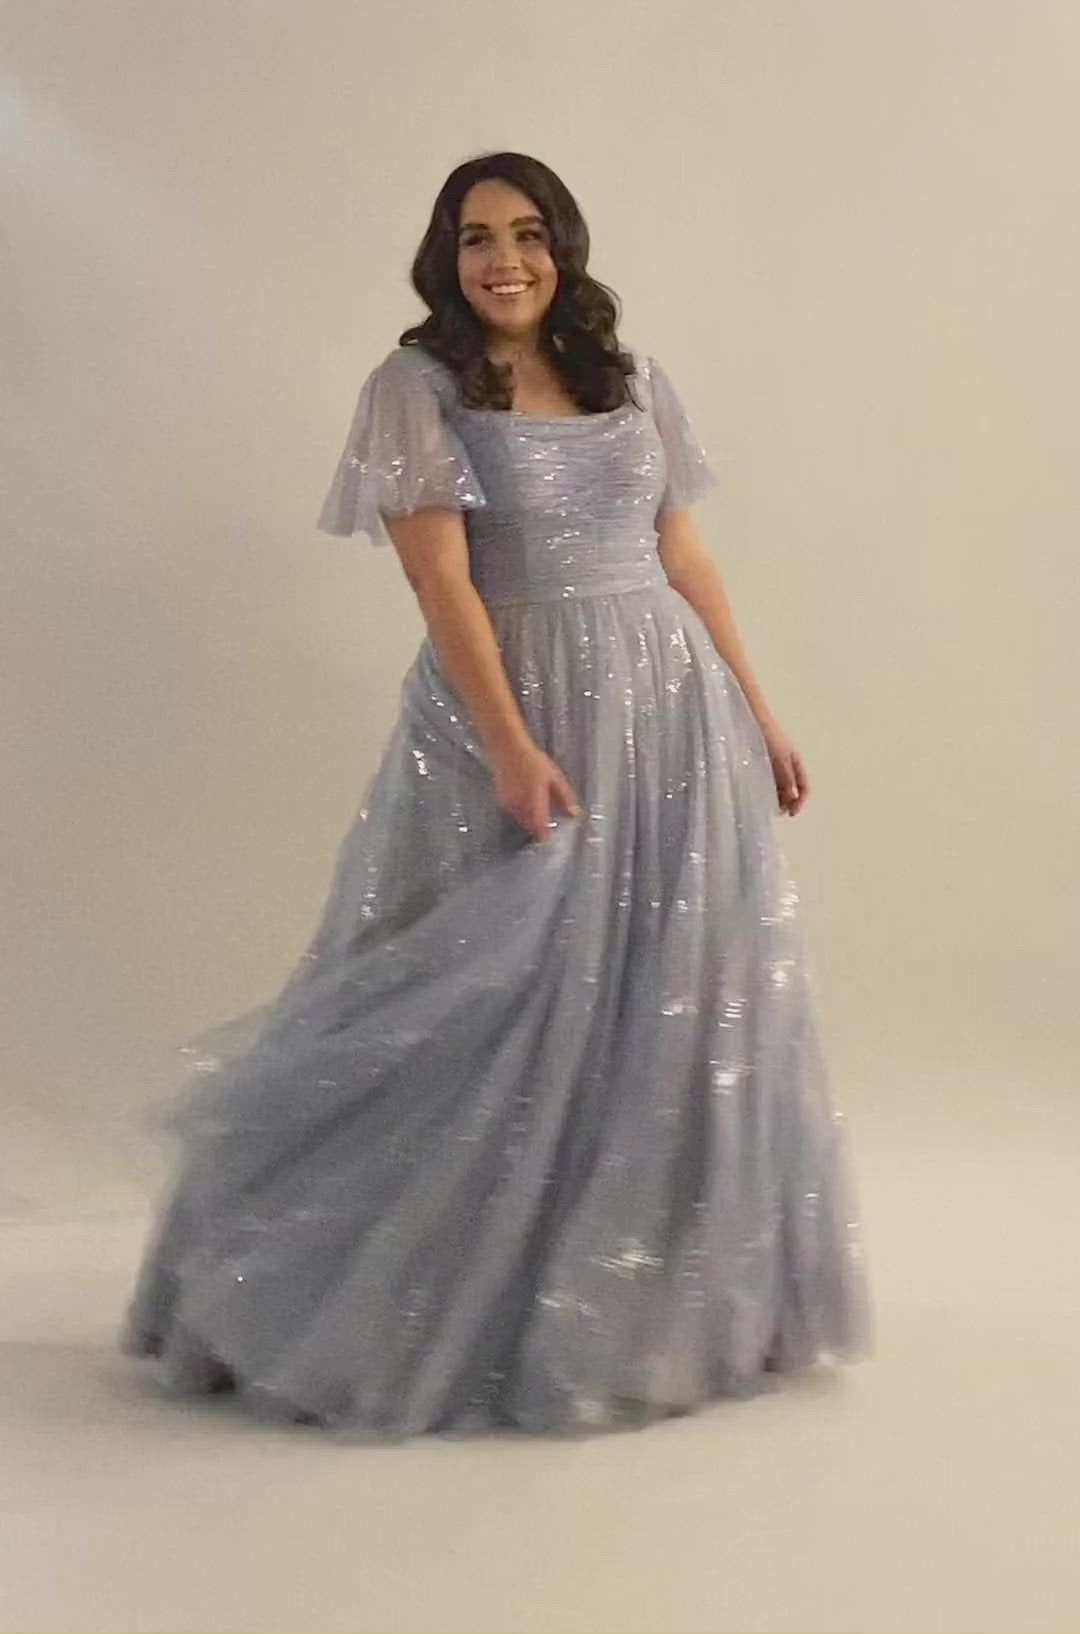 Modest Dresses - Modest Prom Dress - Formalwear Modest Dresses - Bridesmaid Modest Dresses. Video of modest prom dress with square neck and flutter sleeves and sparkly tulle skirt. 